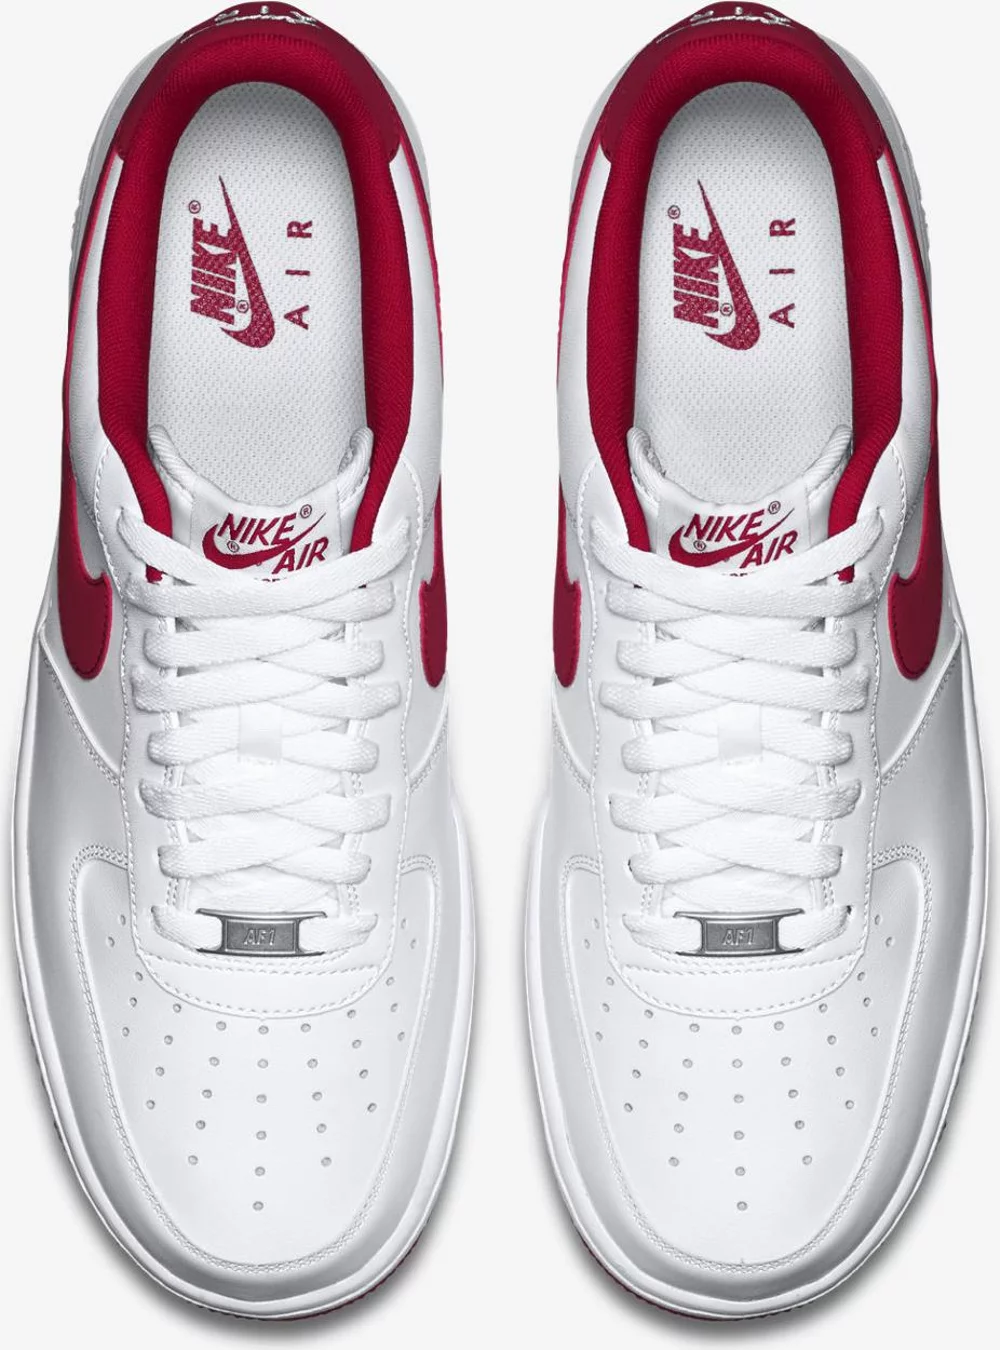 nike-air-force-1-low-white-gym-red-488298-156-release-2014